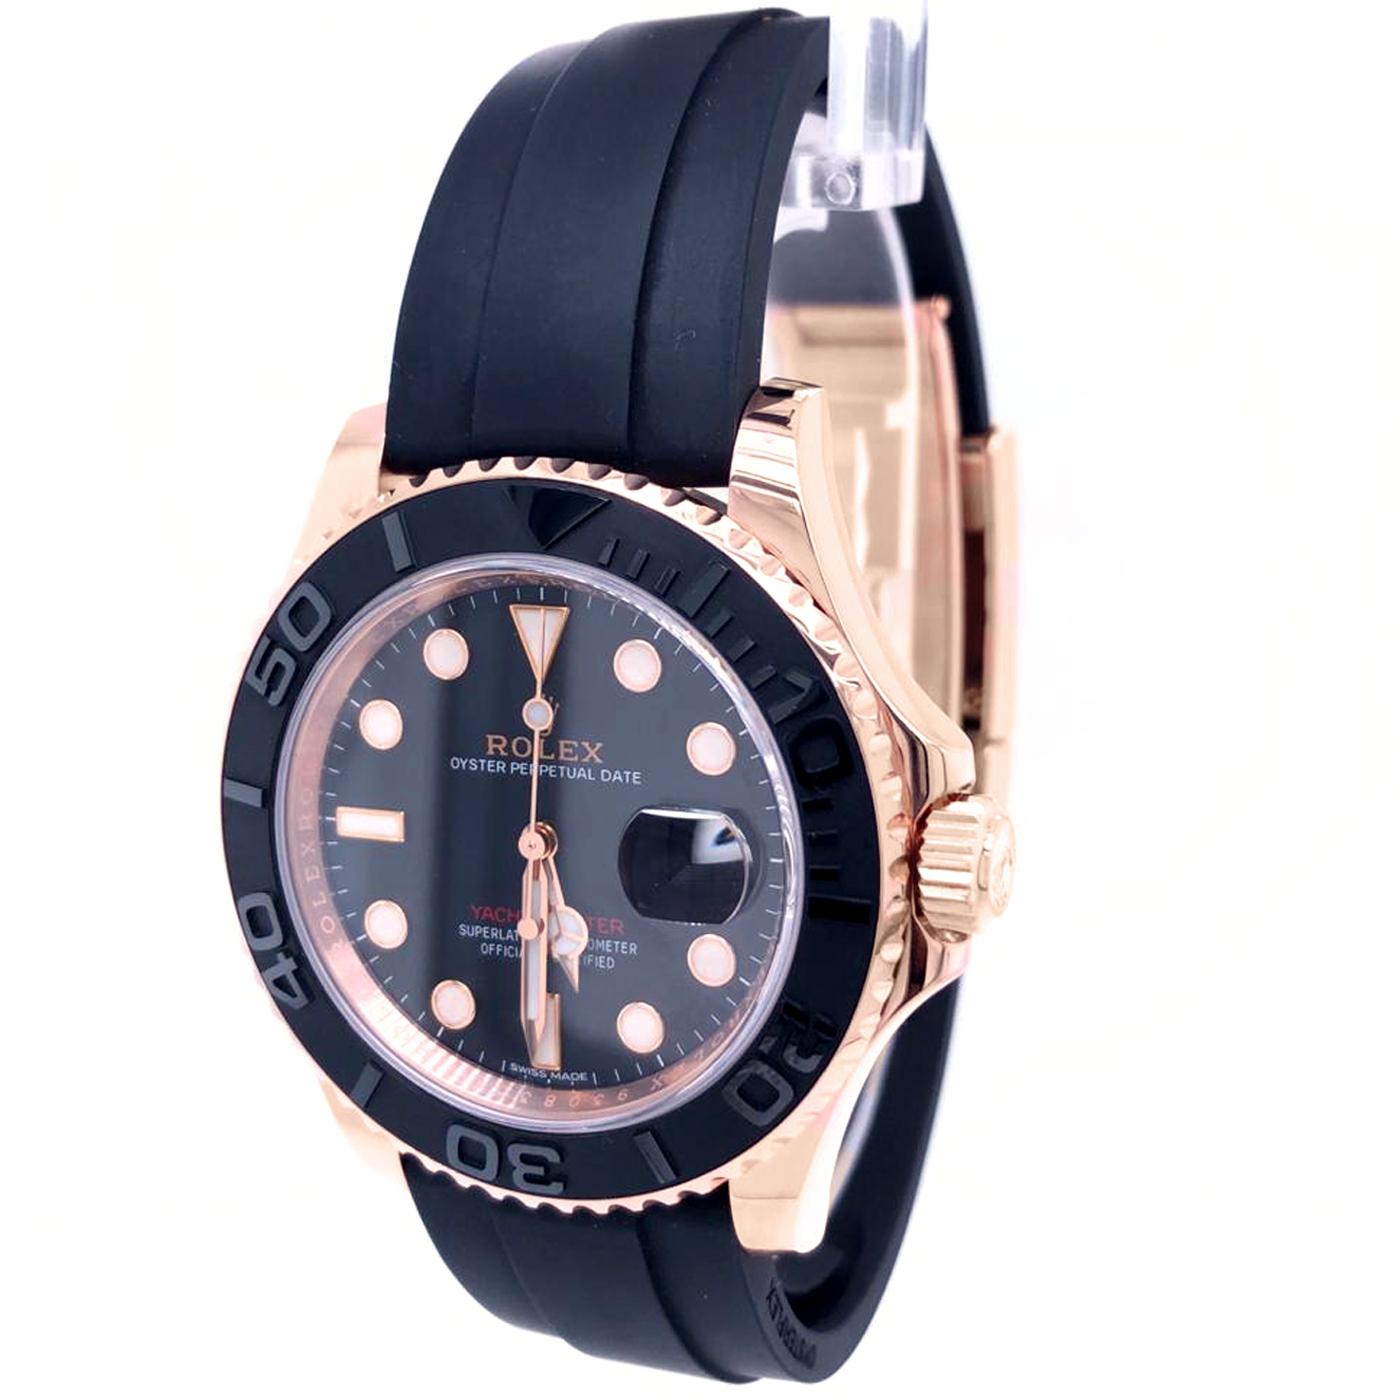 The Oyster Perpetual Yacht-Master 40mm Everose gold with an Oysterflex bracelet. This model features an intense black dial and a Bidirectional rotatable 60-minute graduated bezel with matt black Cerachrom insert in ceramic, polished raised numerals,